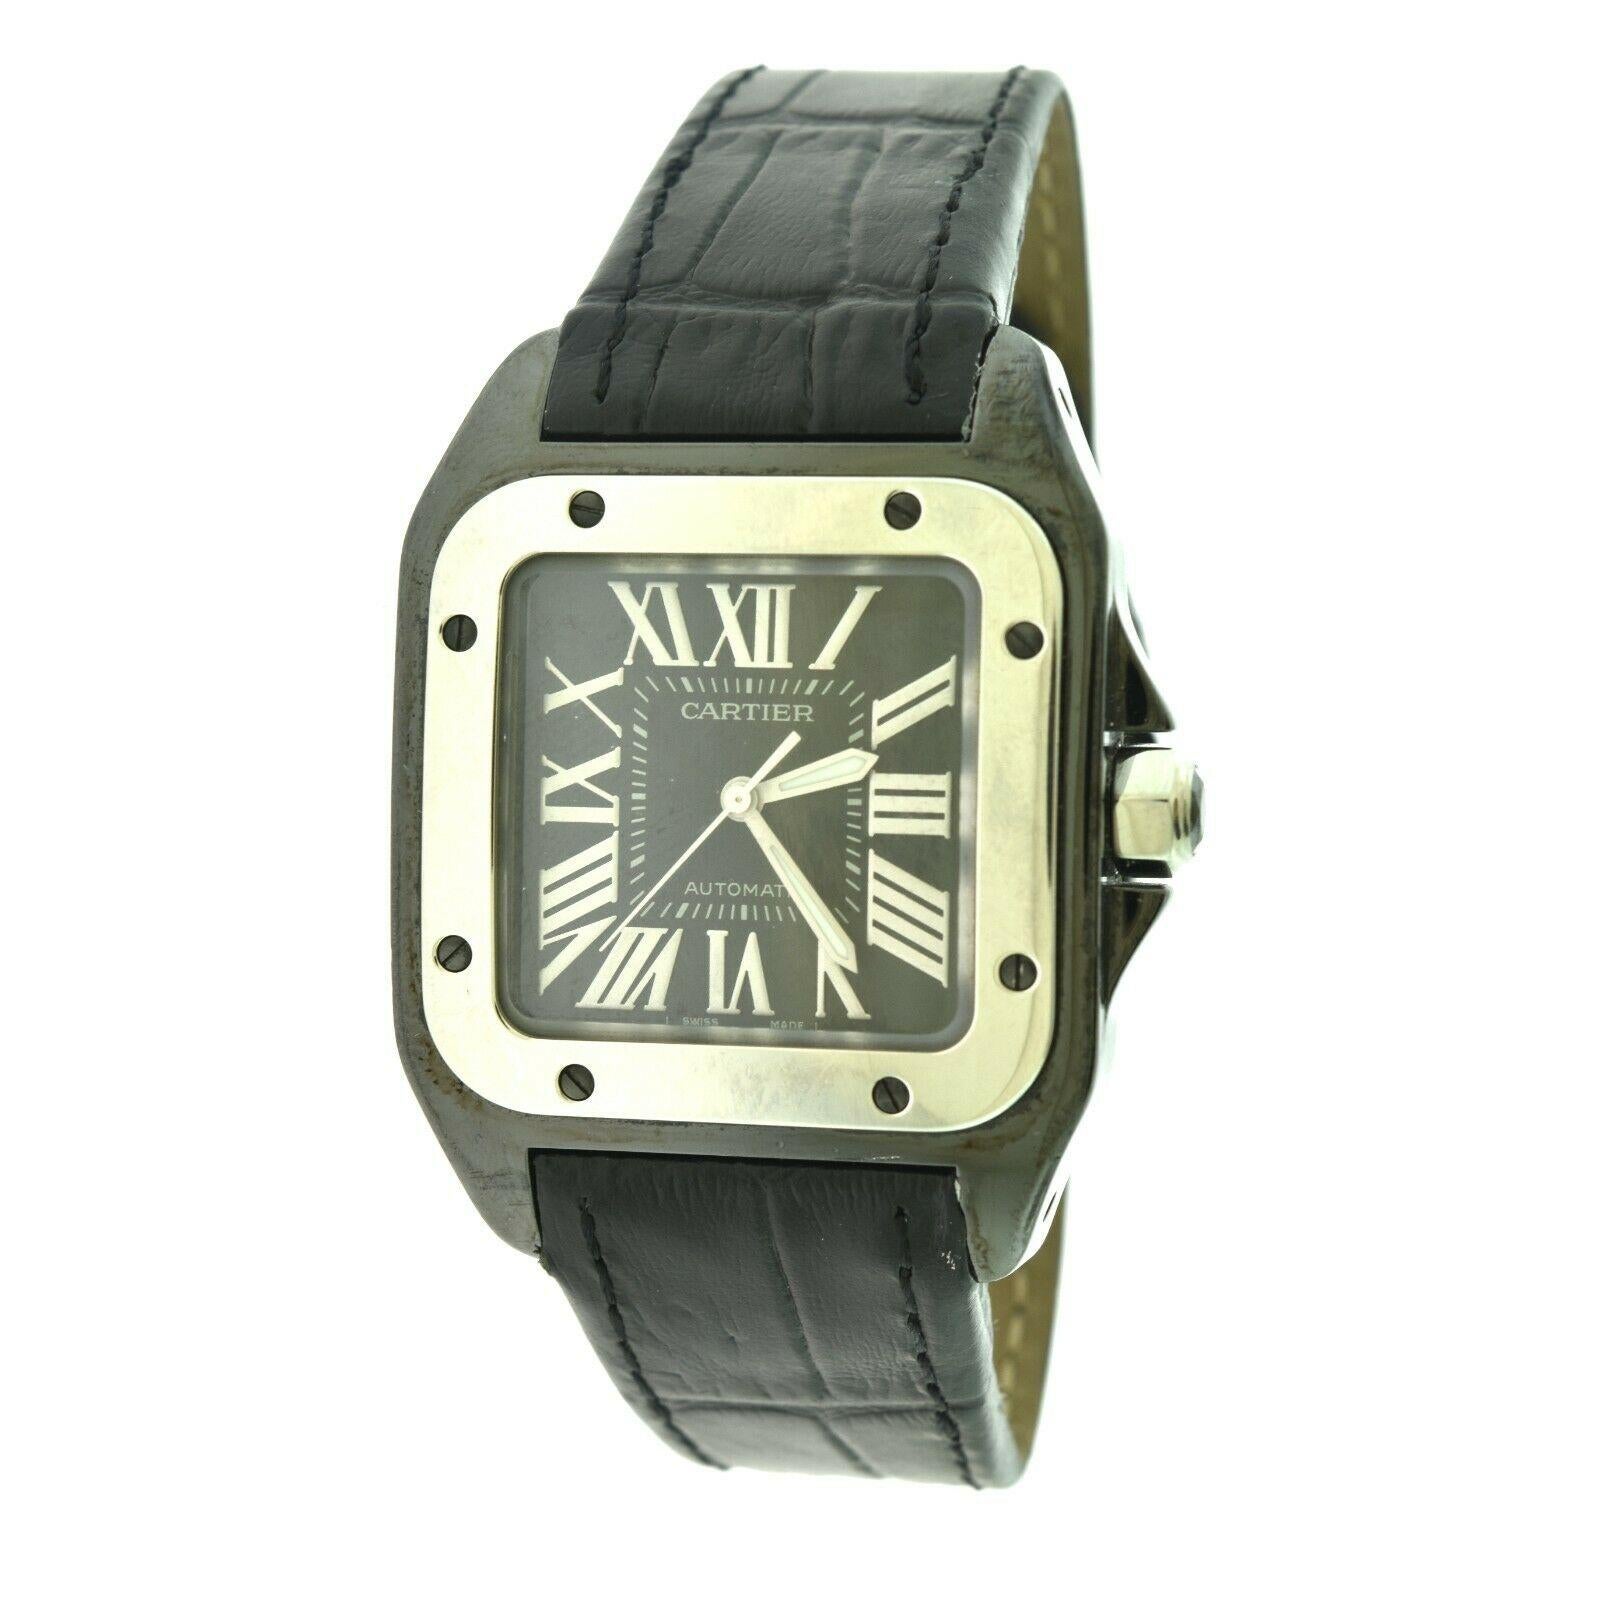 Cartier Santos 100 Ref 2878 Stainless Steel, Leather Band Watch 'Y-26'